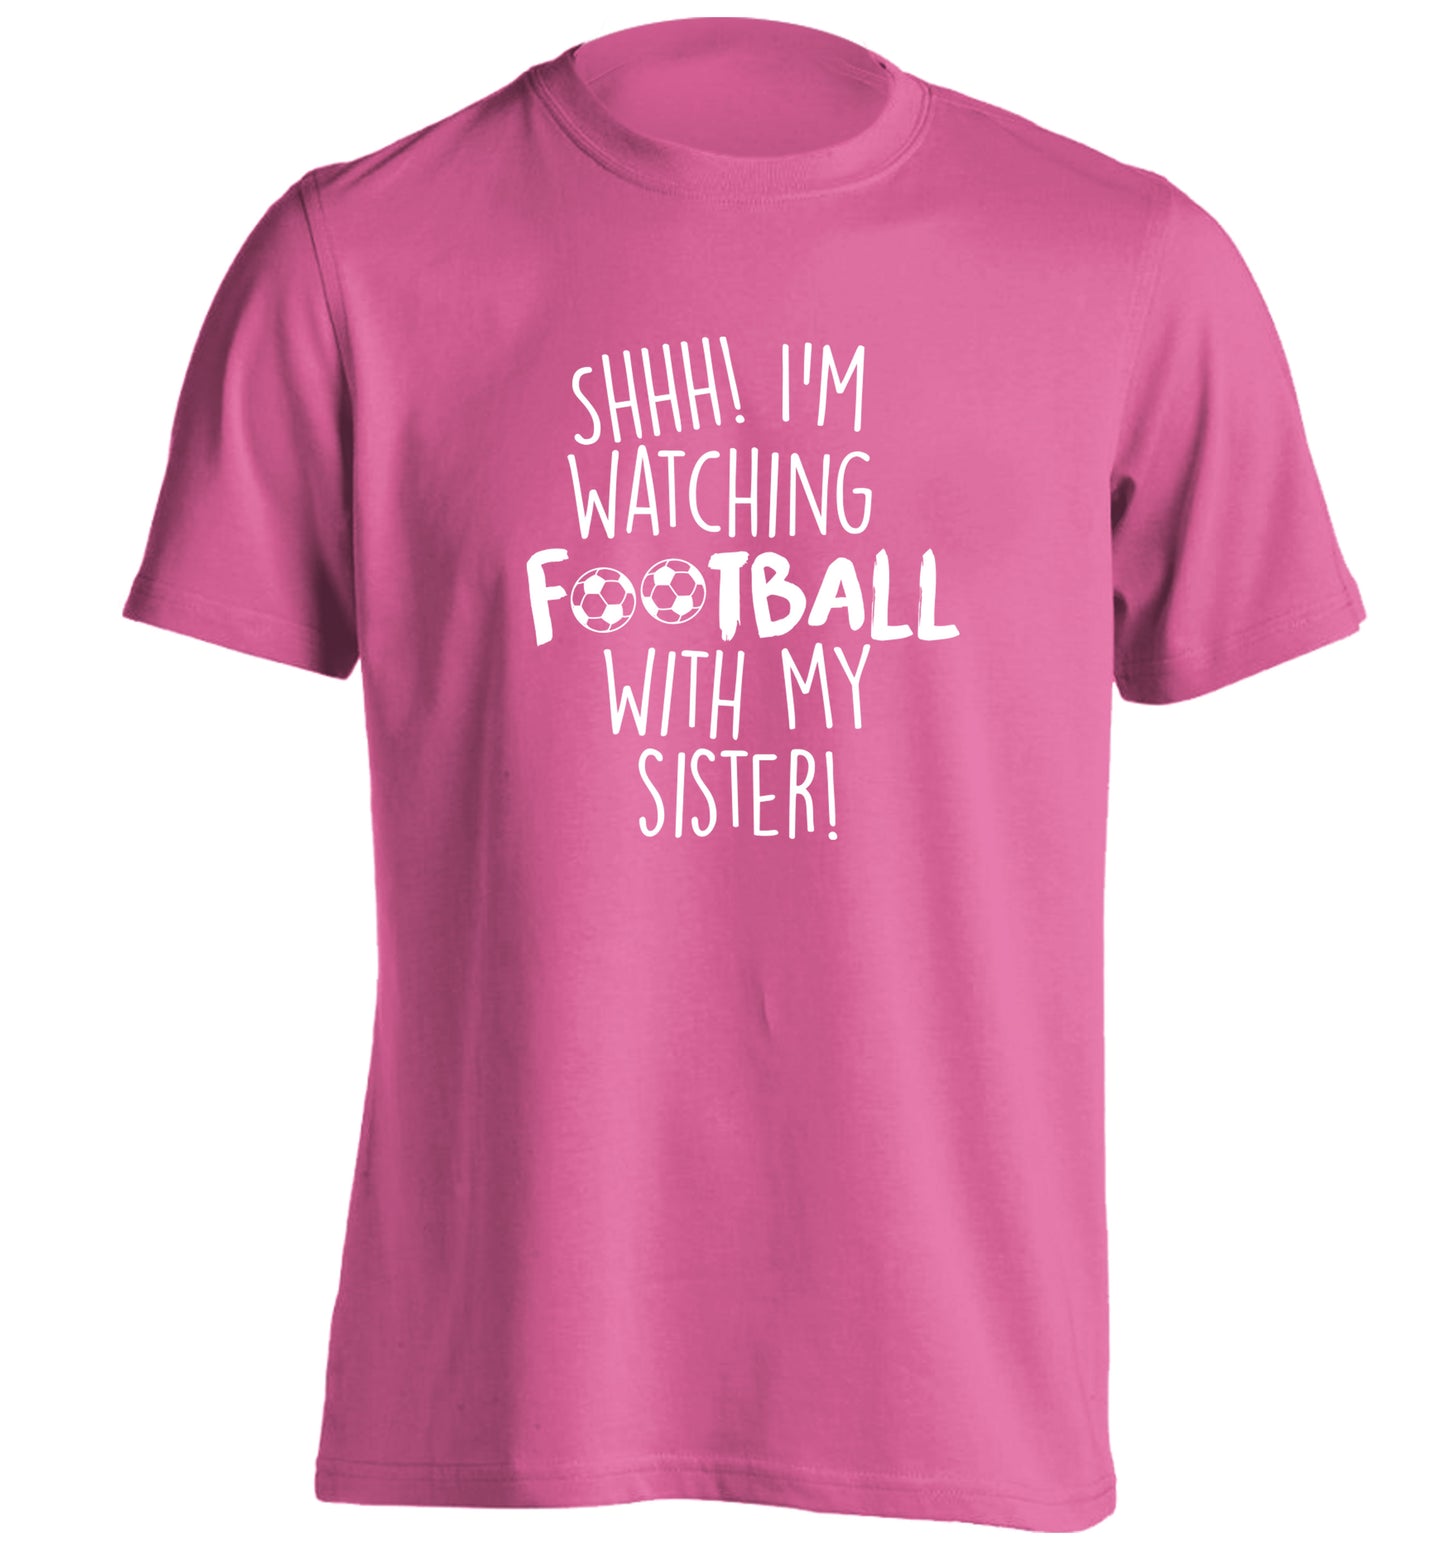 Shhh I'm watching football with my sister adults unisexpink Tshirt 2XL